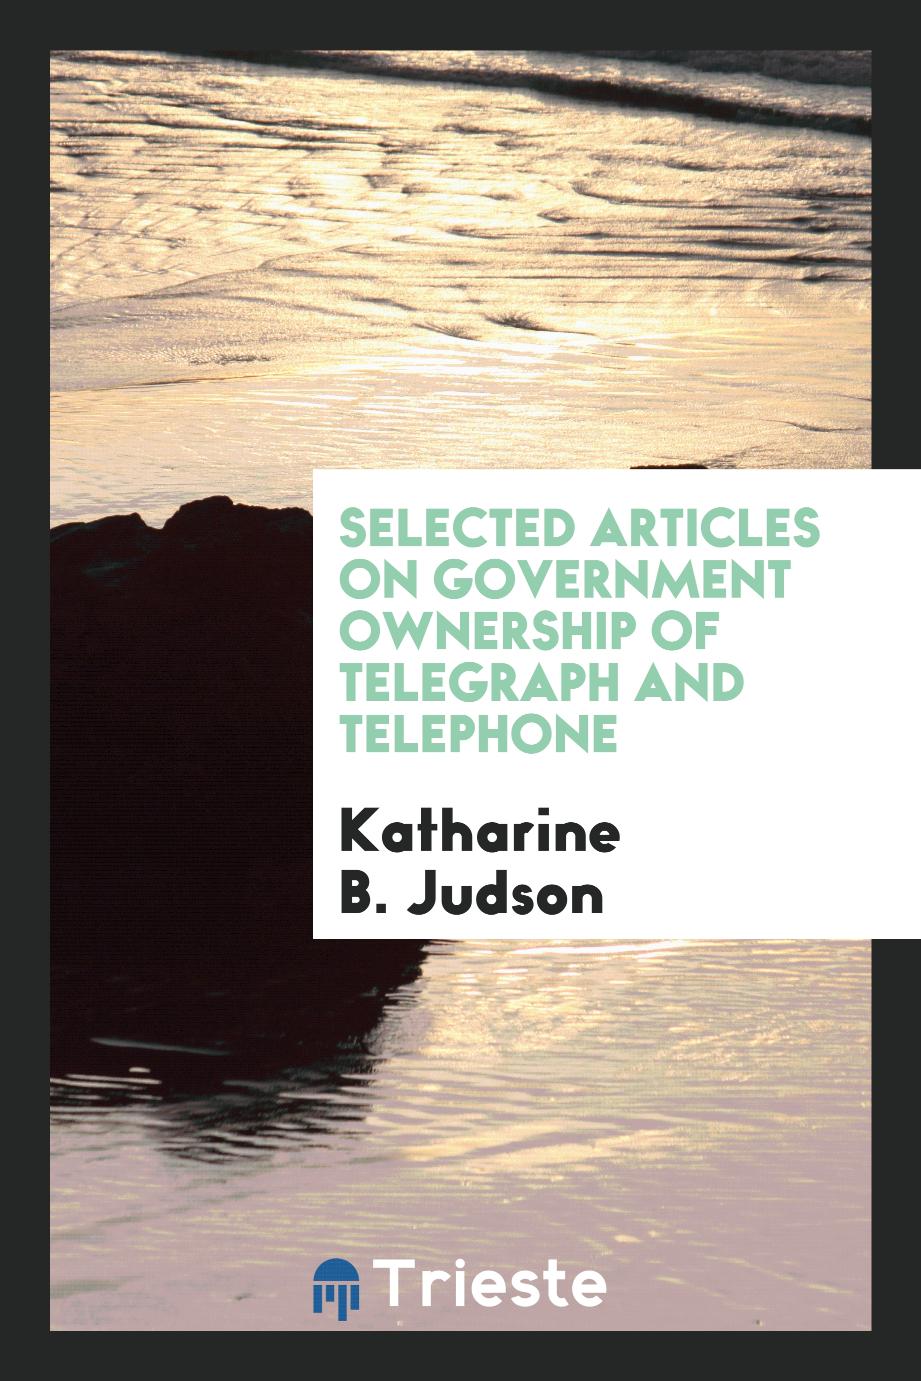 Selected articles on government ownership of telegraph and telephone